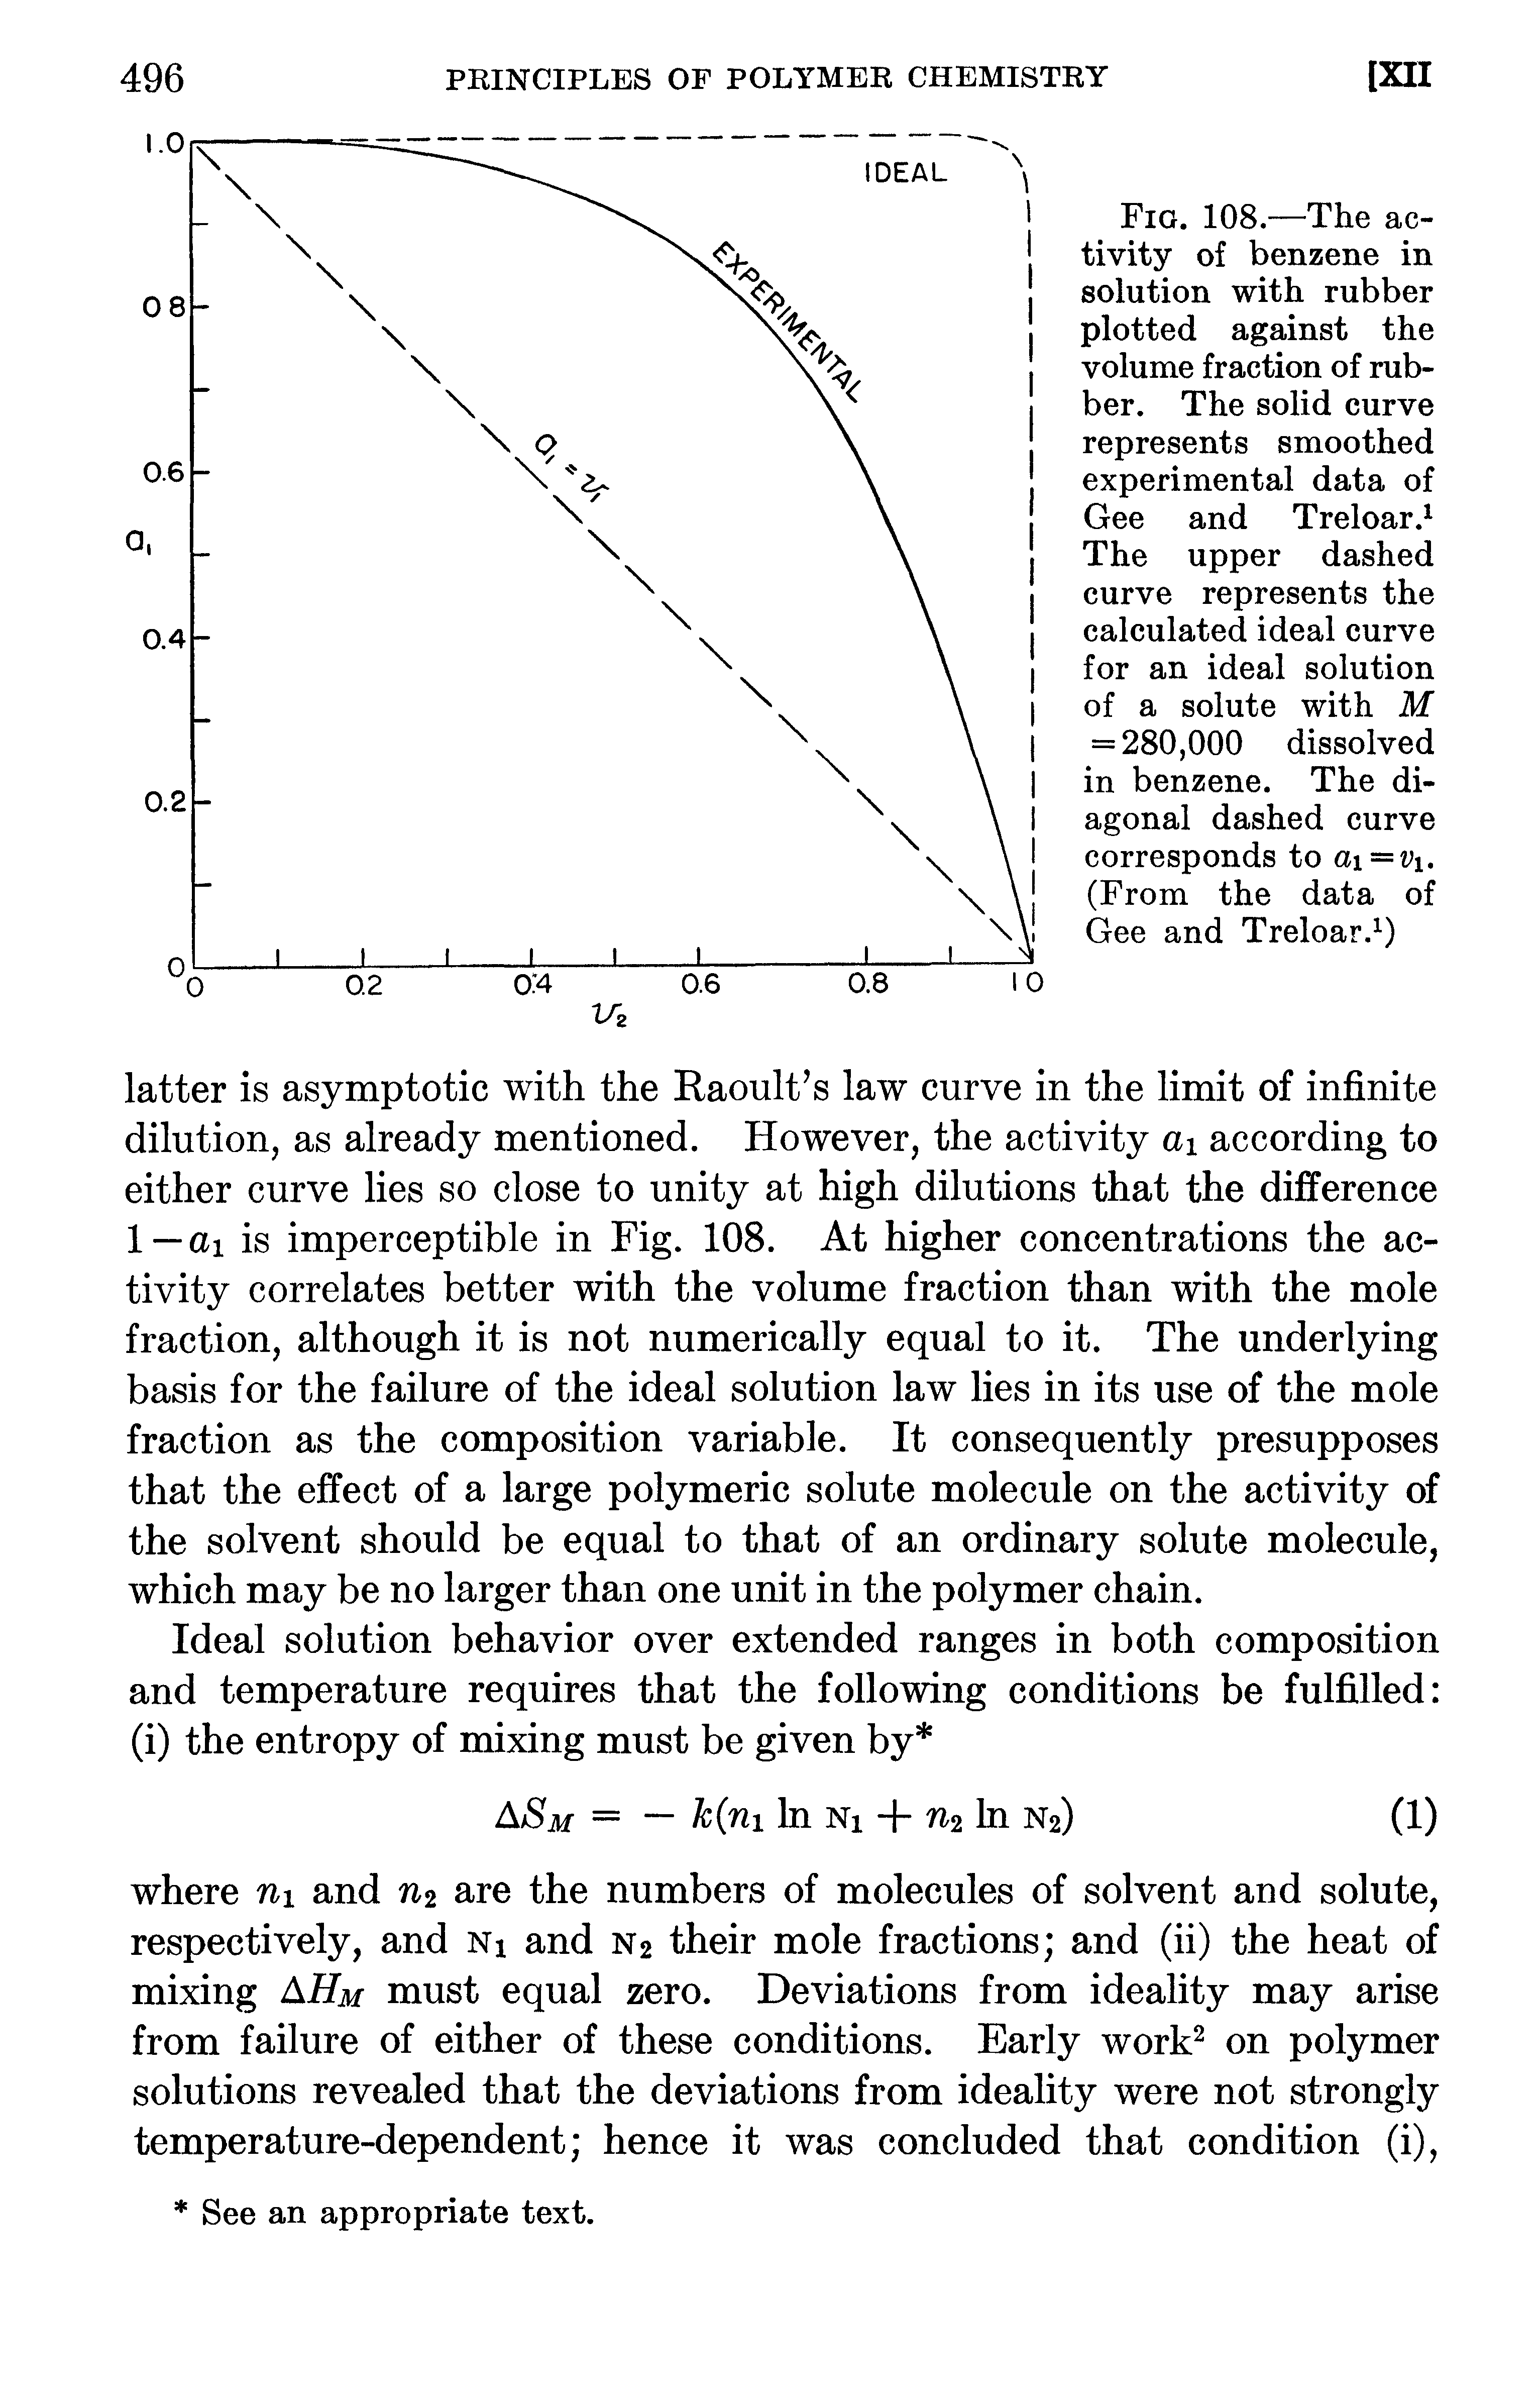 Fig. 108.—The activity of benzene in solution with rubber plotted against the volume fraction of rubber. The solid curve represents smoothed experimental data of Gee and Treloar. The upper dashed curve represents the calculated ideal curve for an ideal solution of a solute with M = 280,000 dissolved in benzene. The diagonal dashed curve corresponds to ai — Vi. (From the data of Gee and Treloar. )...